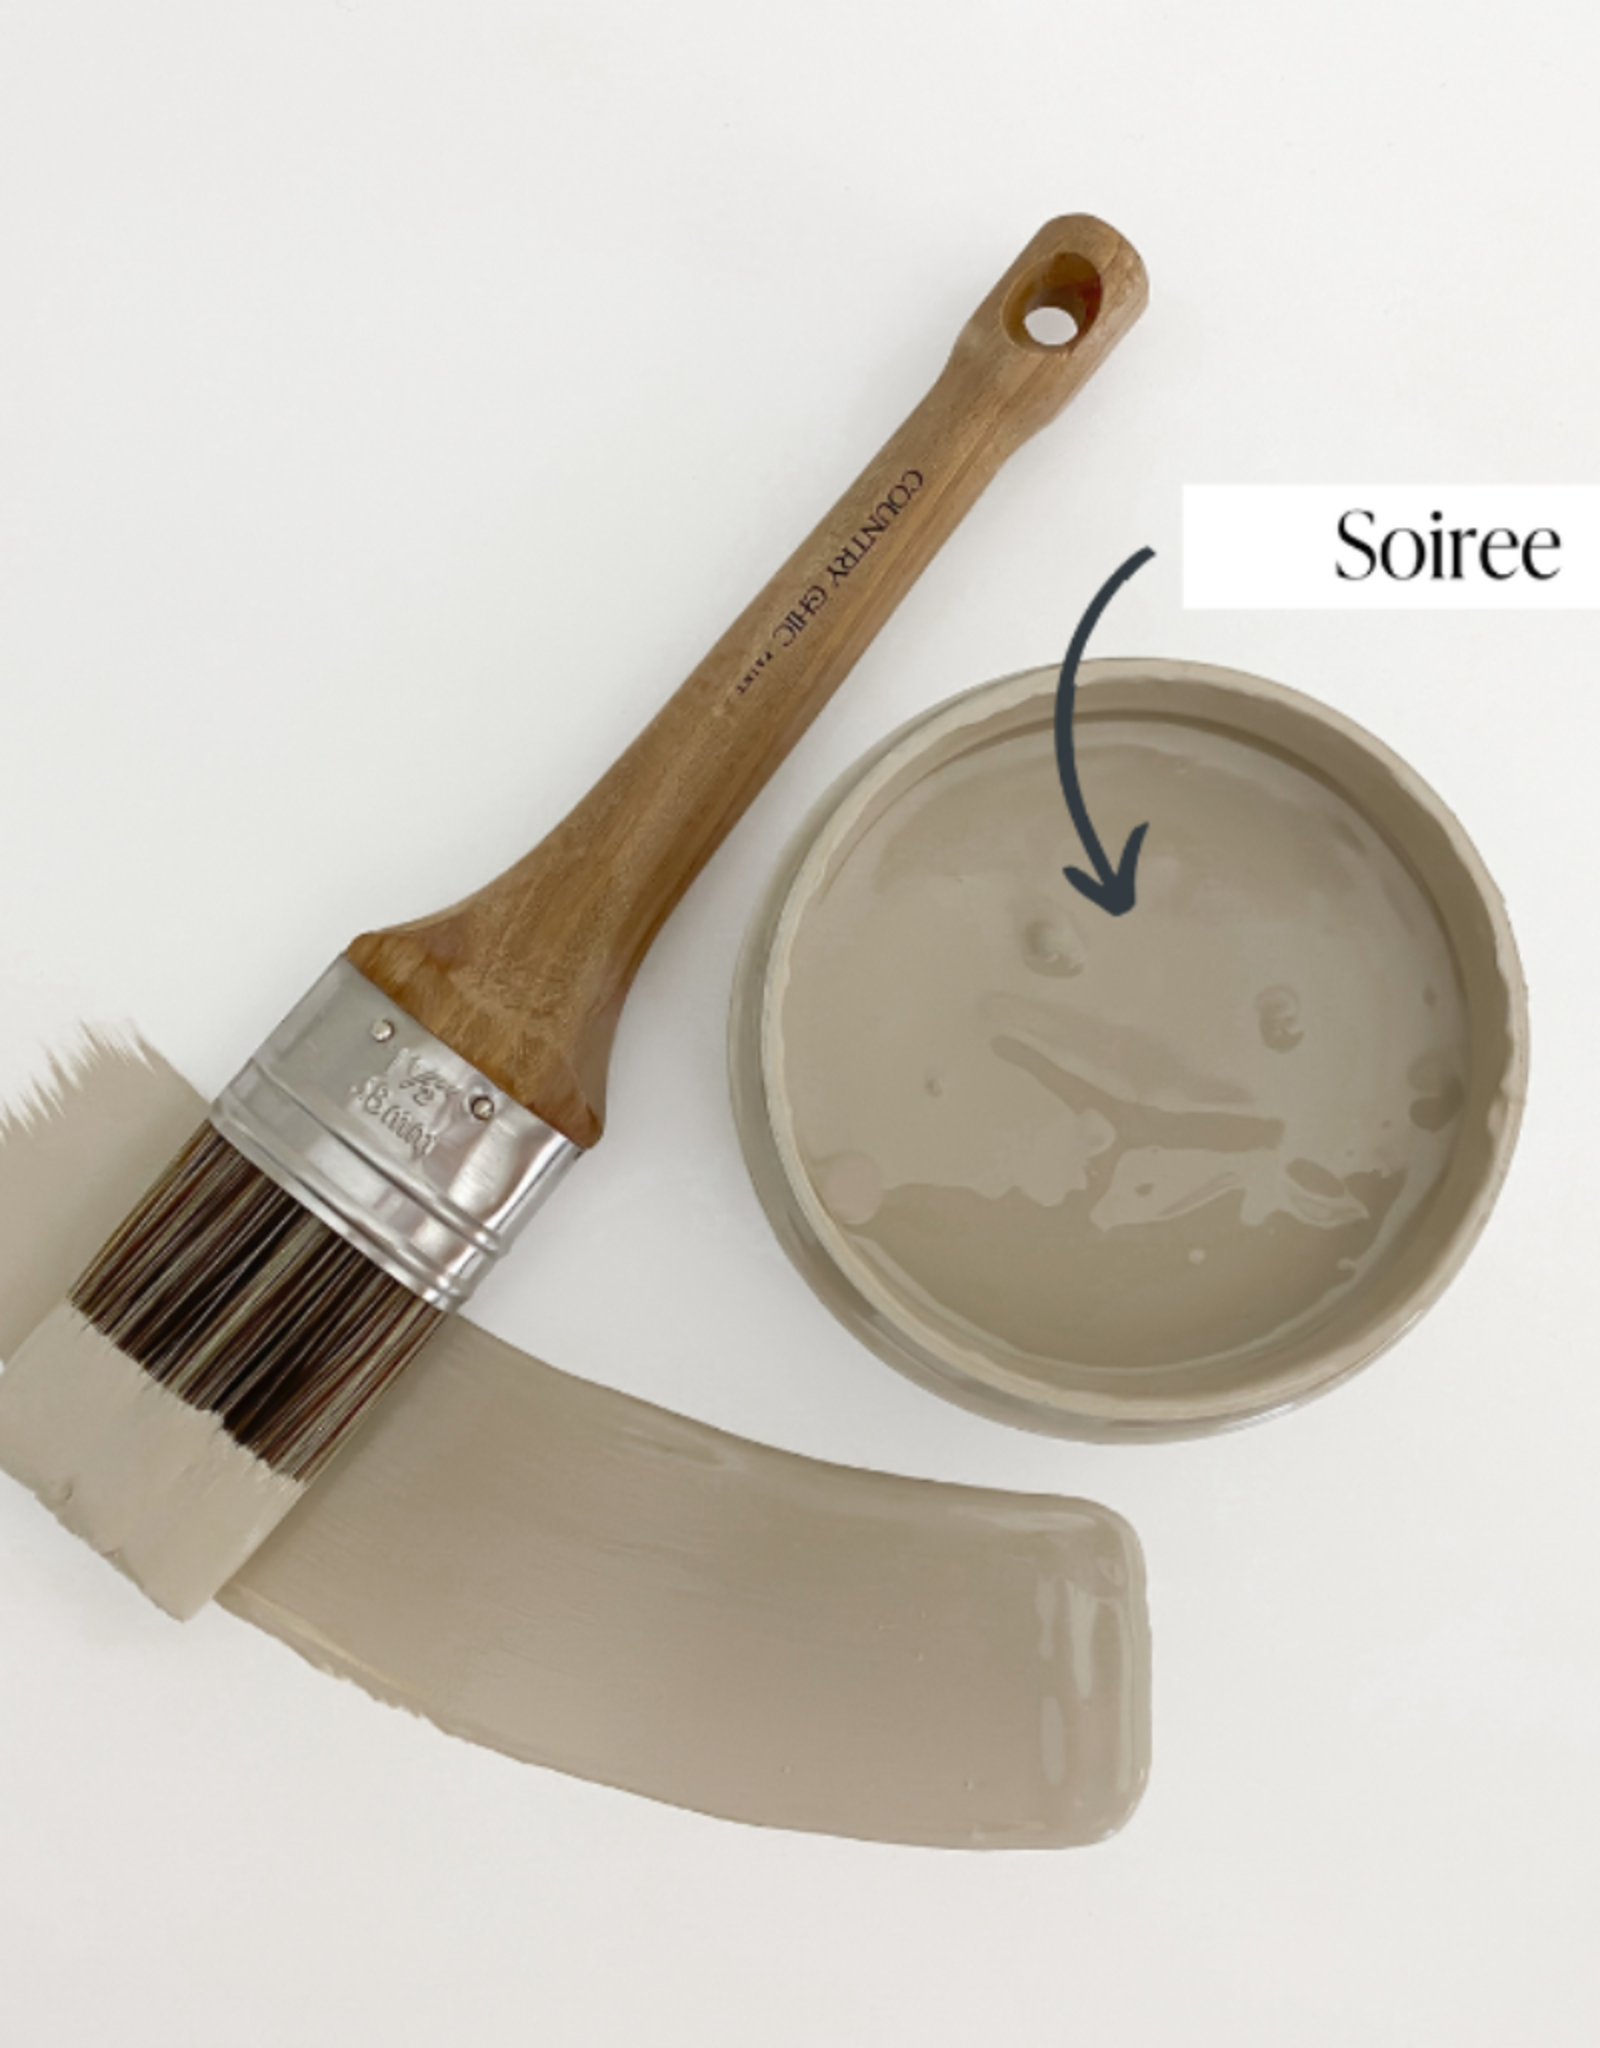 Country Chic Country Chic Paint Sample - 4oz Soiree